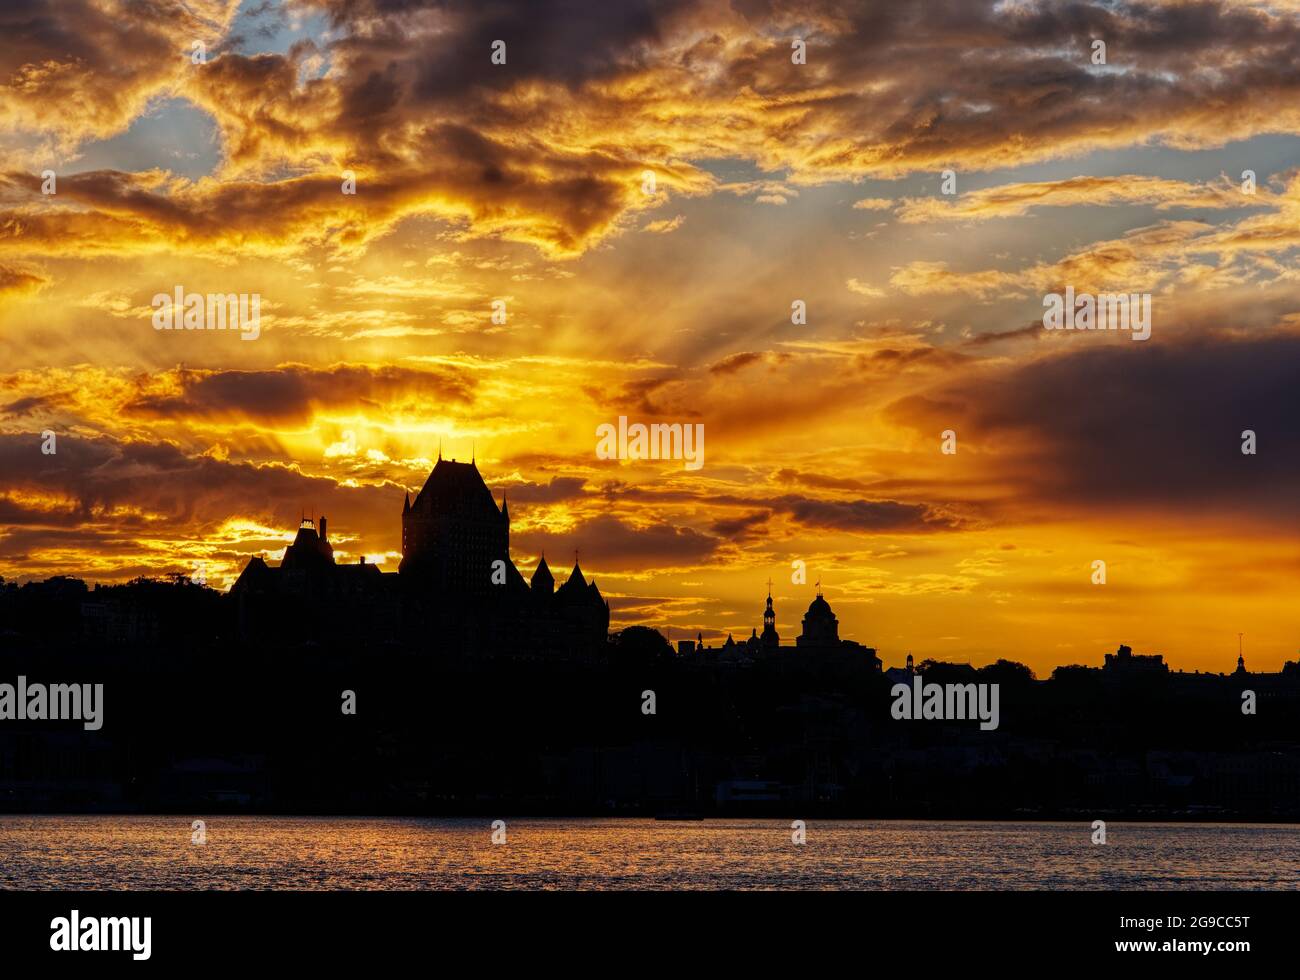 The Quebec City skyline silhouetted against a fiery sunset, as seen from Lévis, Canada Stock Photo